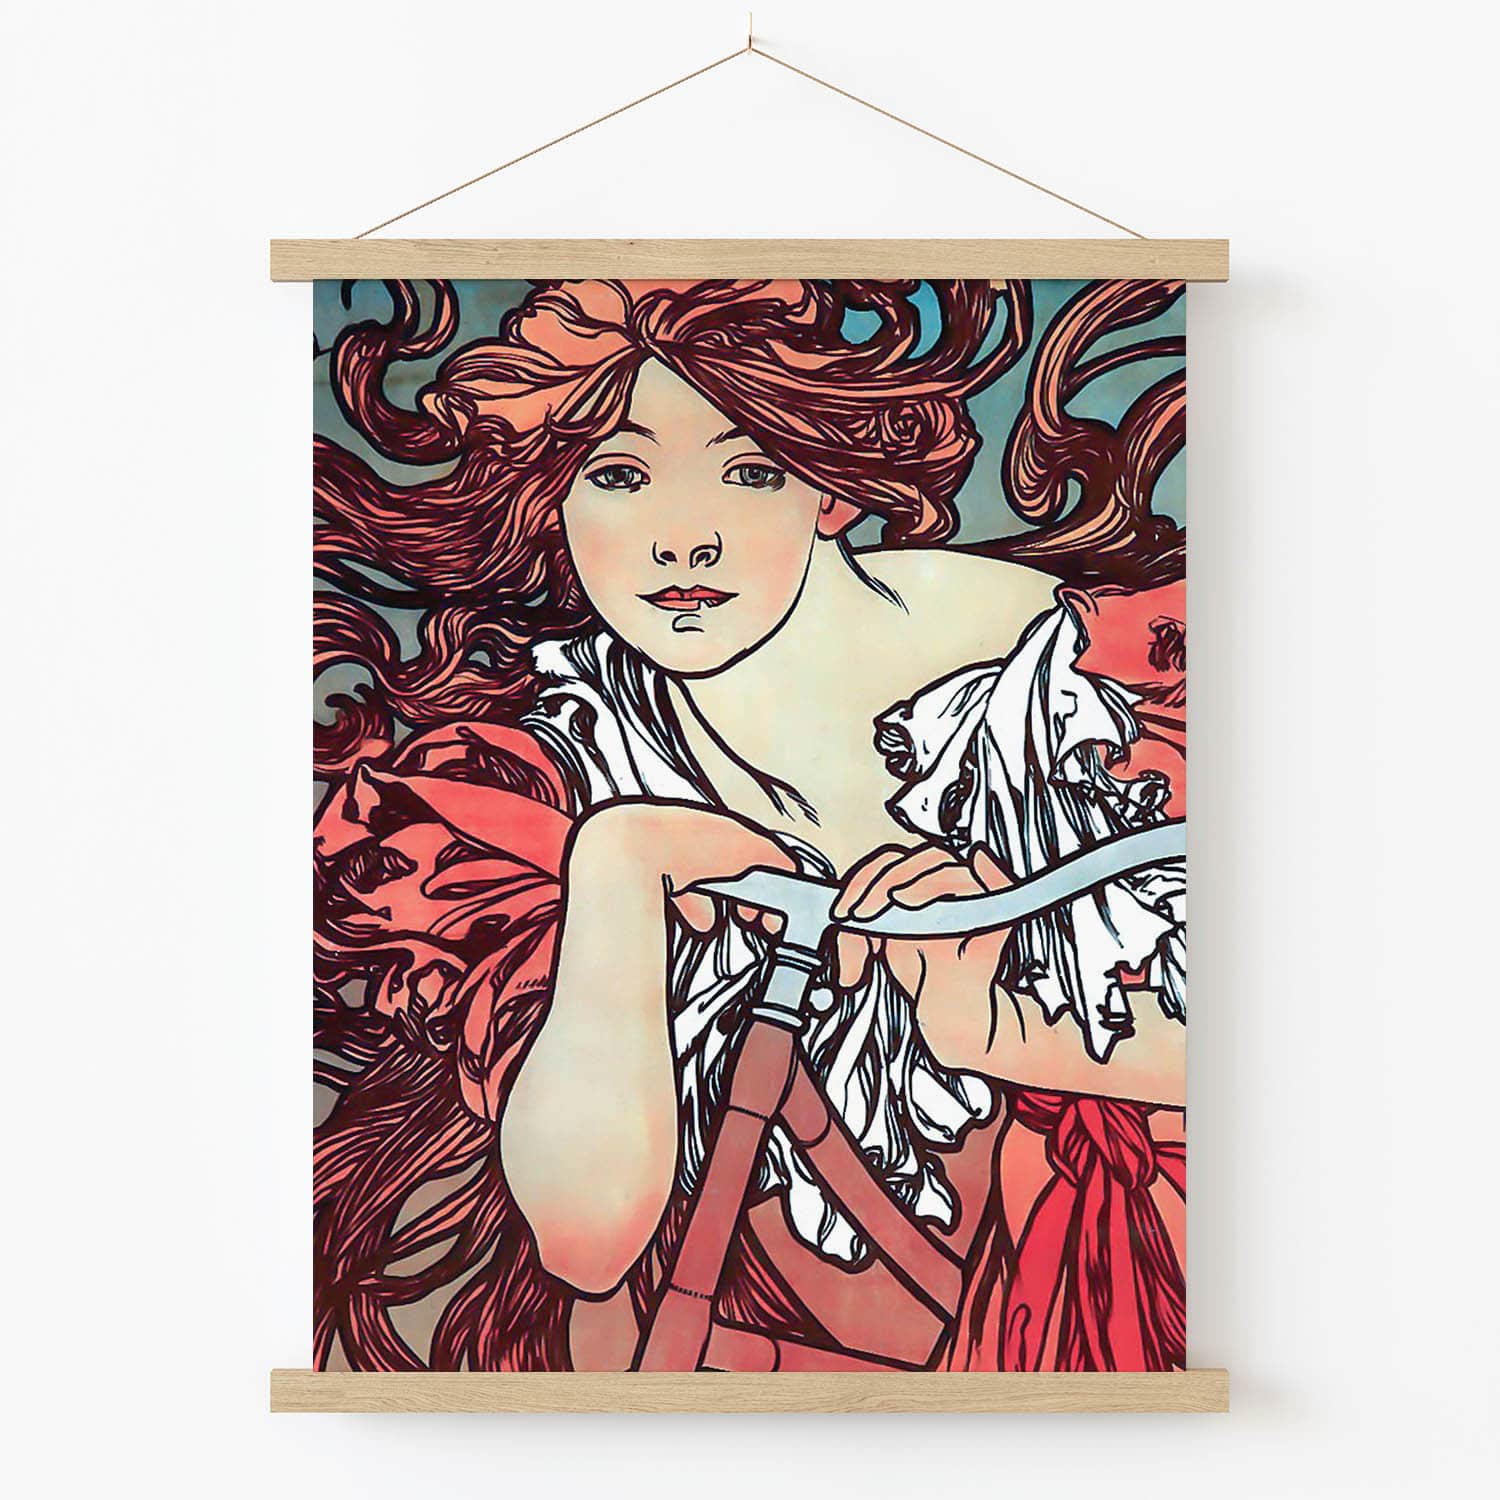 Woman with Flowing Red Hair on a Bicycle Art Print in Wood Hanger Frame on Wall